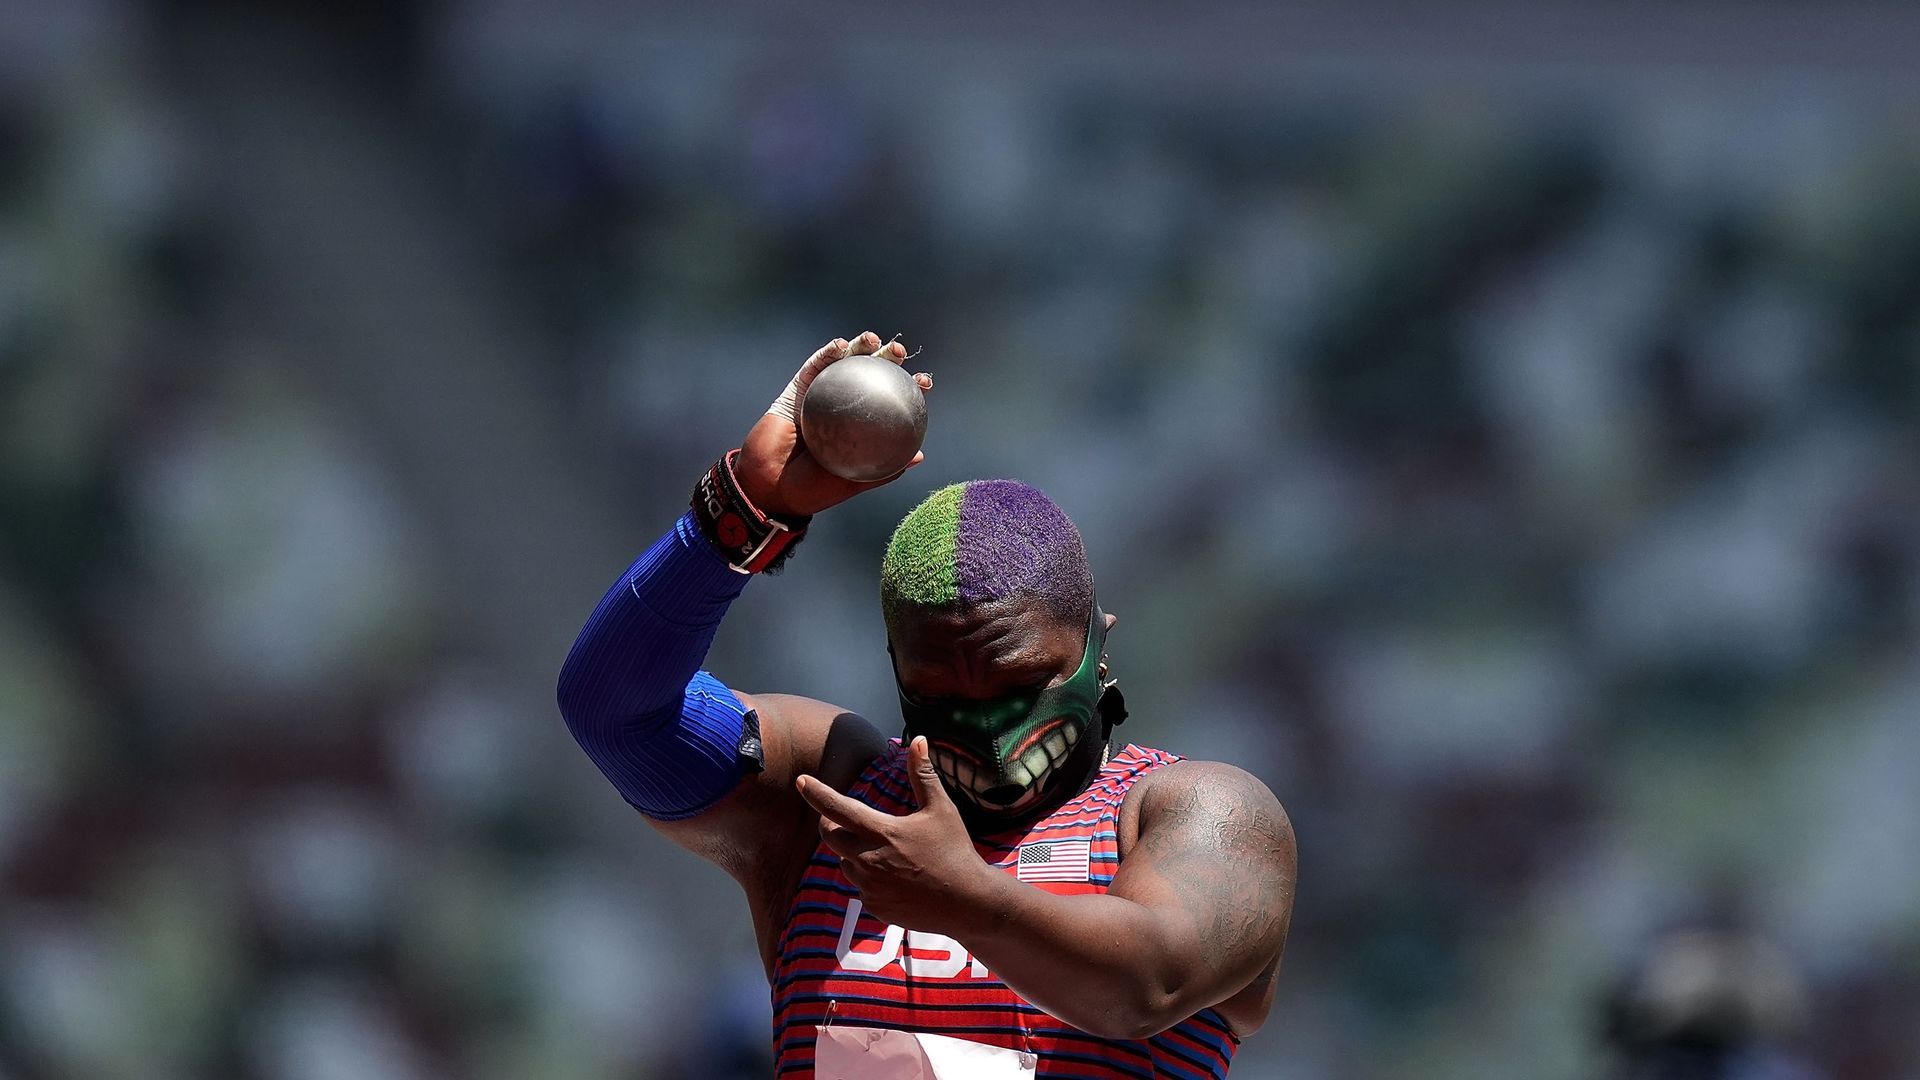 Photo of an athlete holding up a shot put